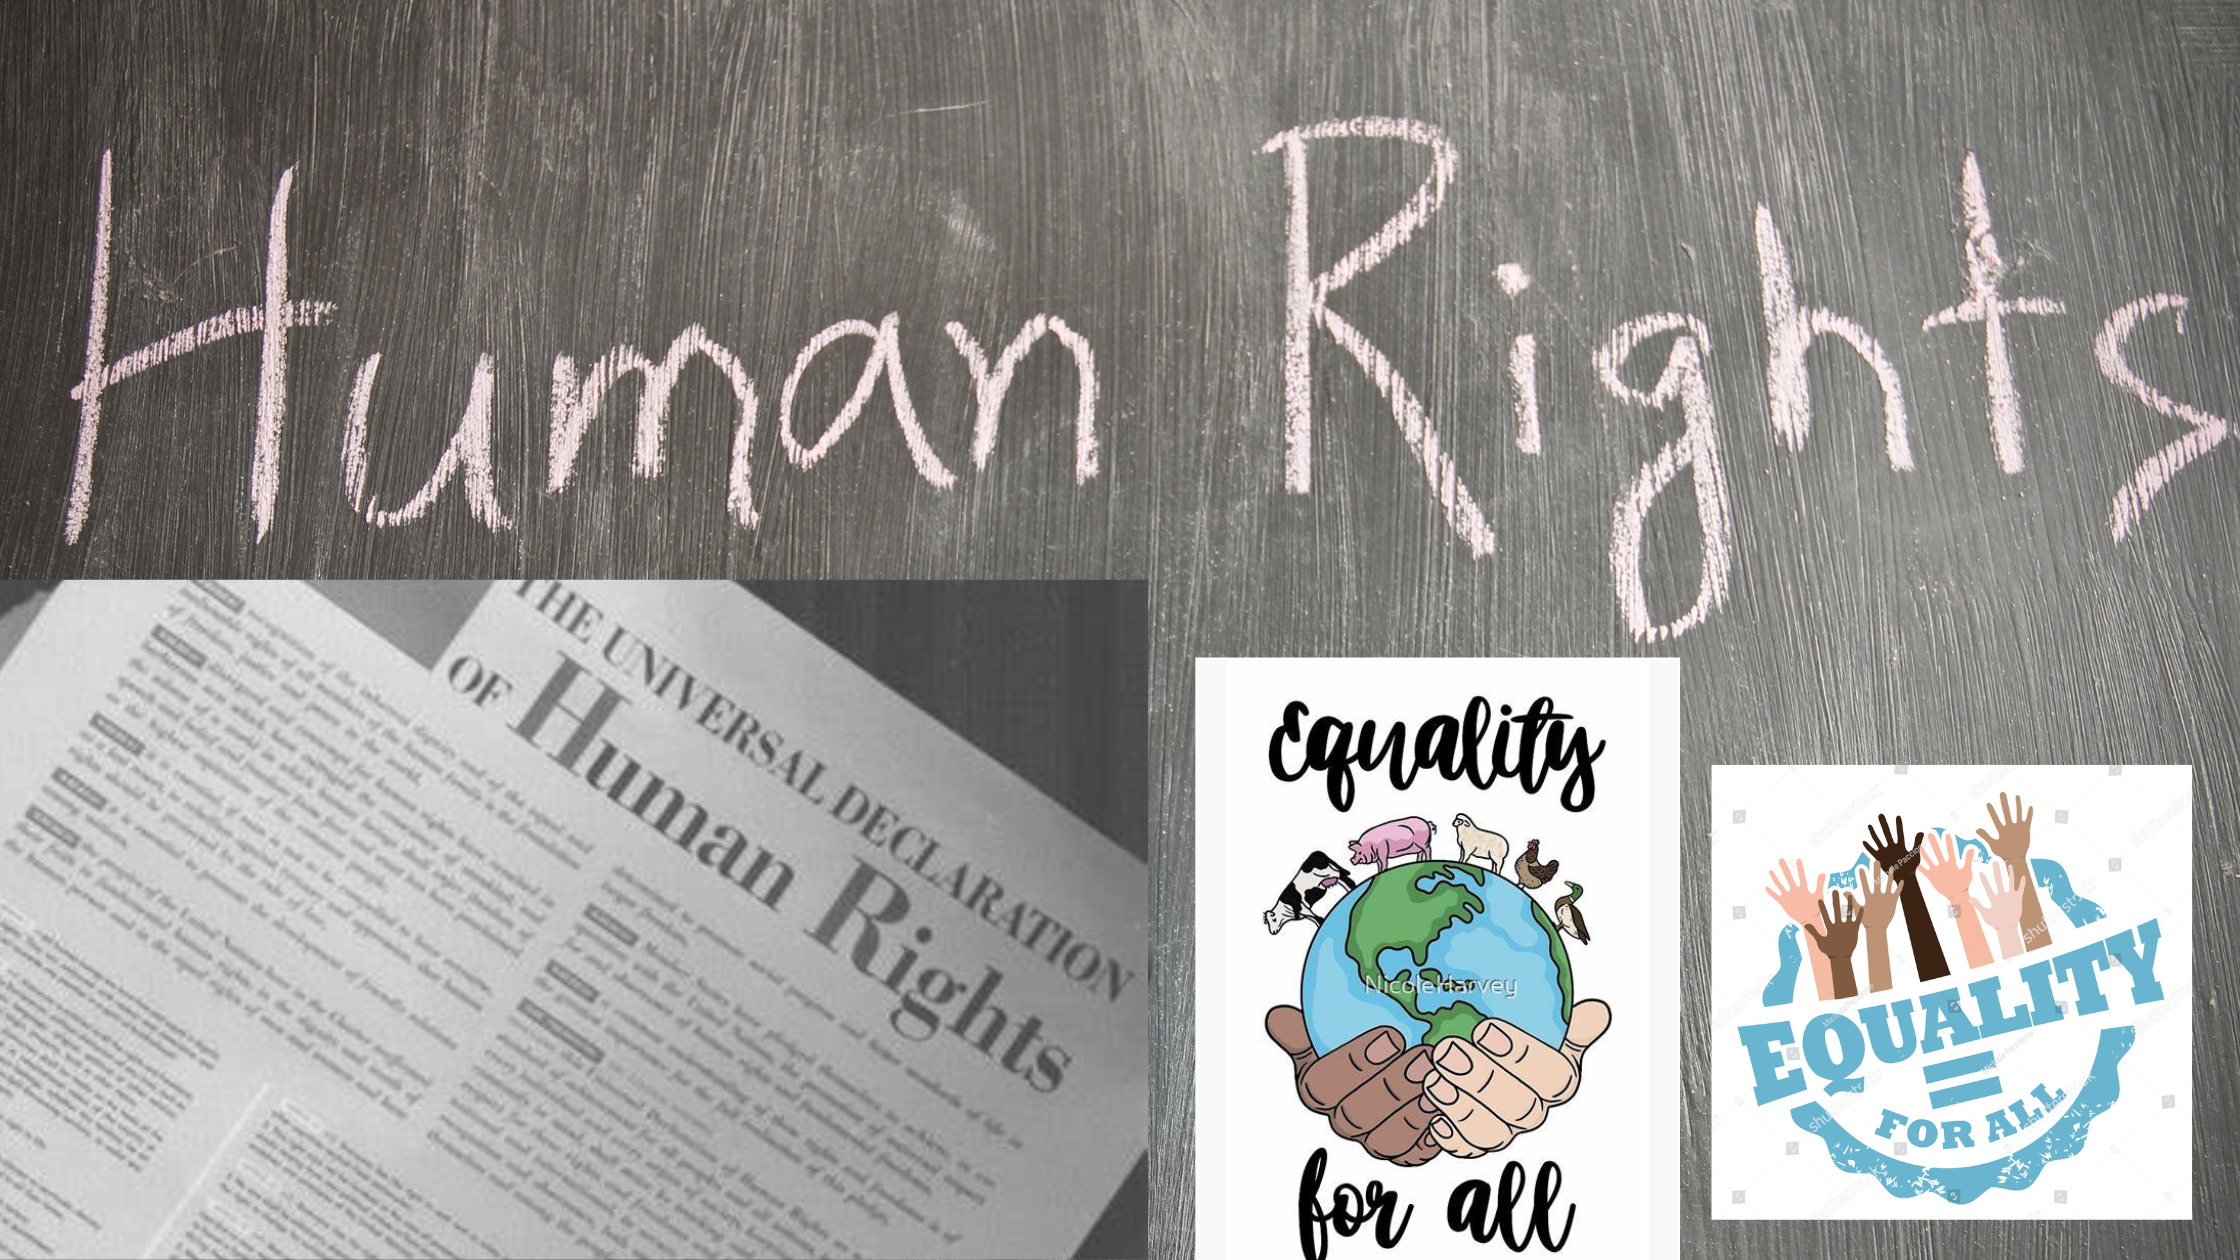 The Declaration of Human Rights: Equality for All